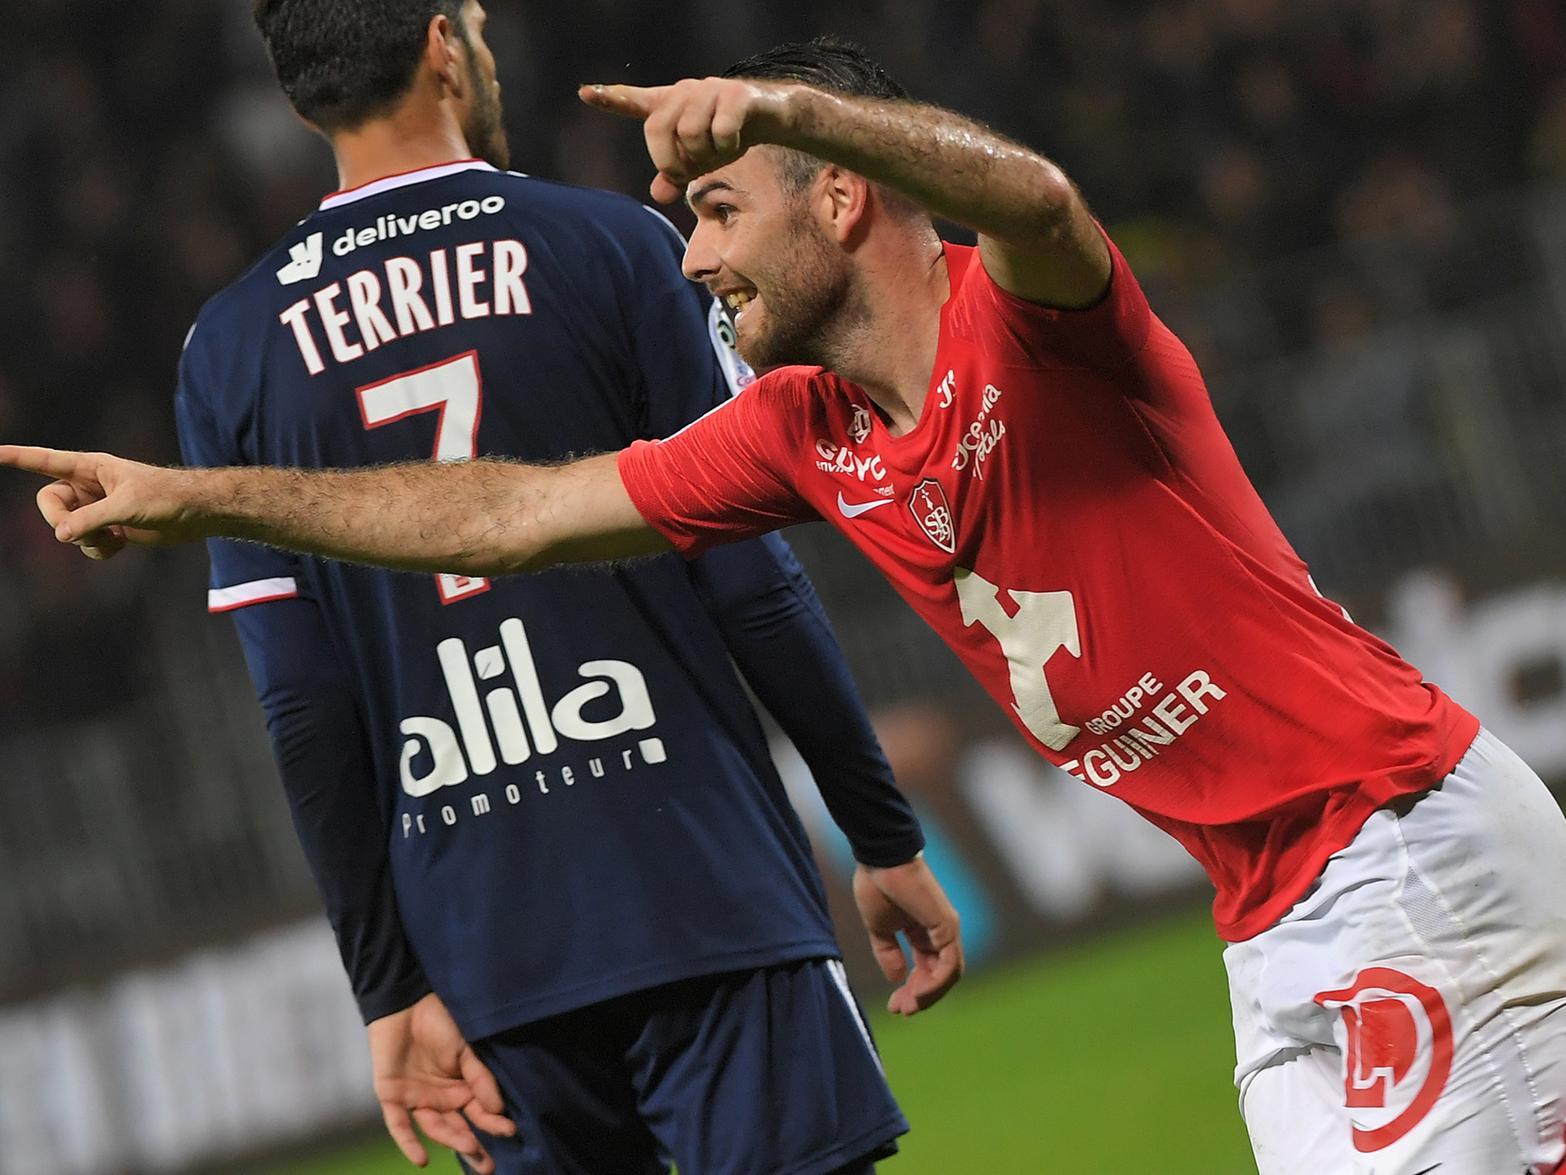 He's been the assist king in Ligue 1 so far this season, setting up seven goals in 12 matches, and bagging a couple of goals too. He'd be a solid backup option for Leandro Trossard.